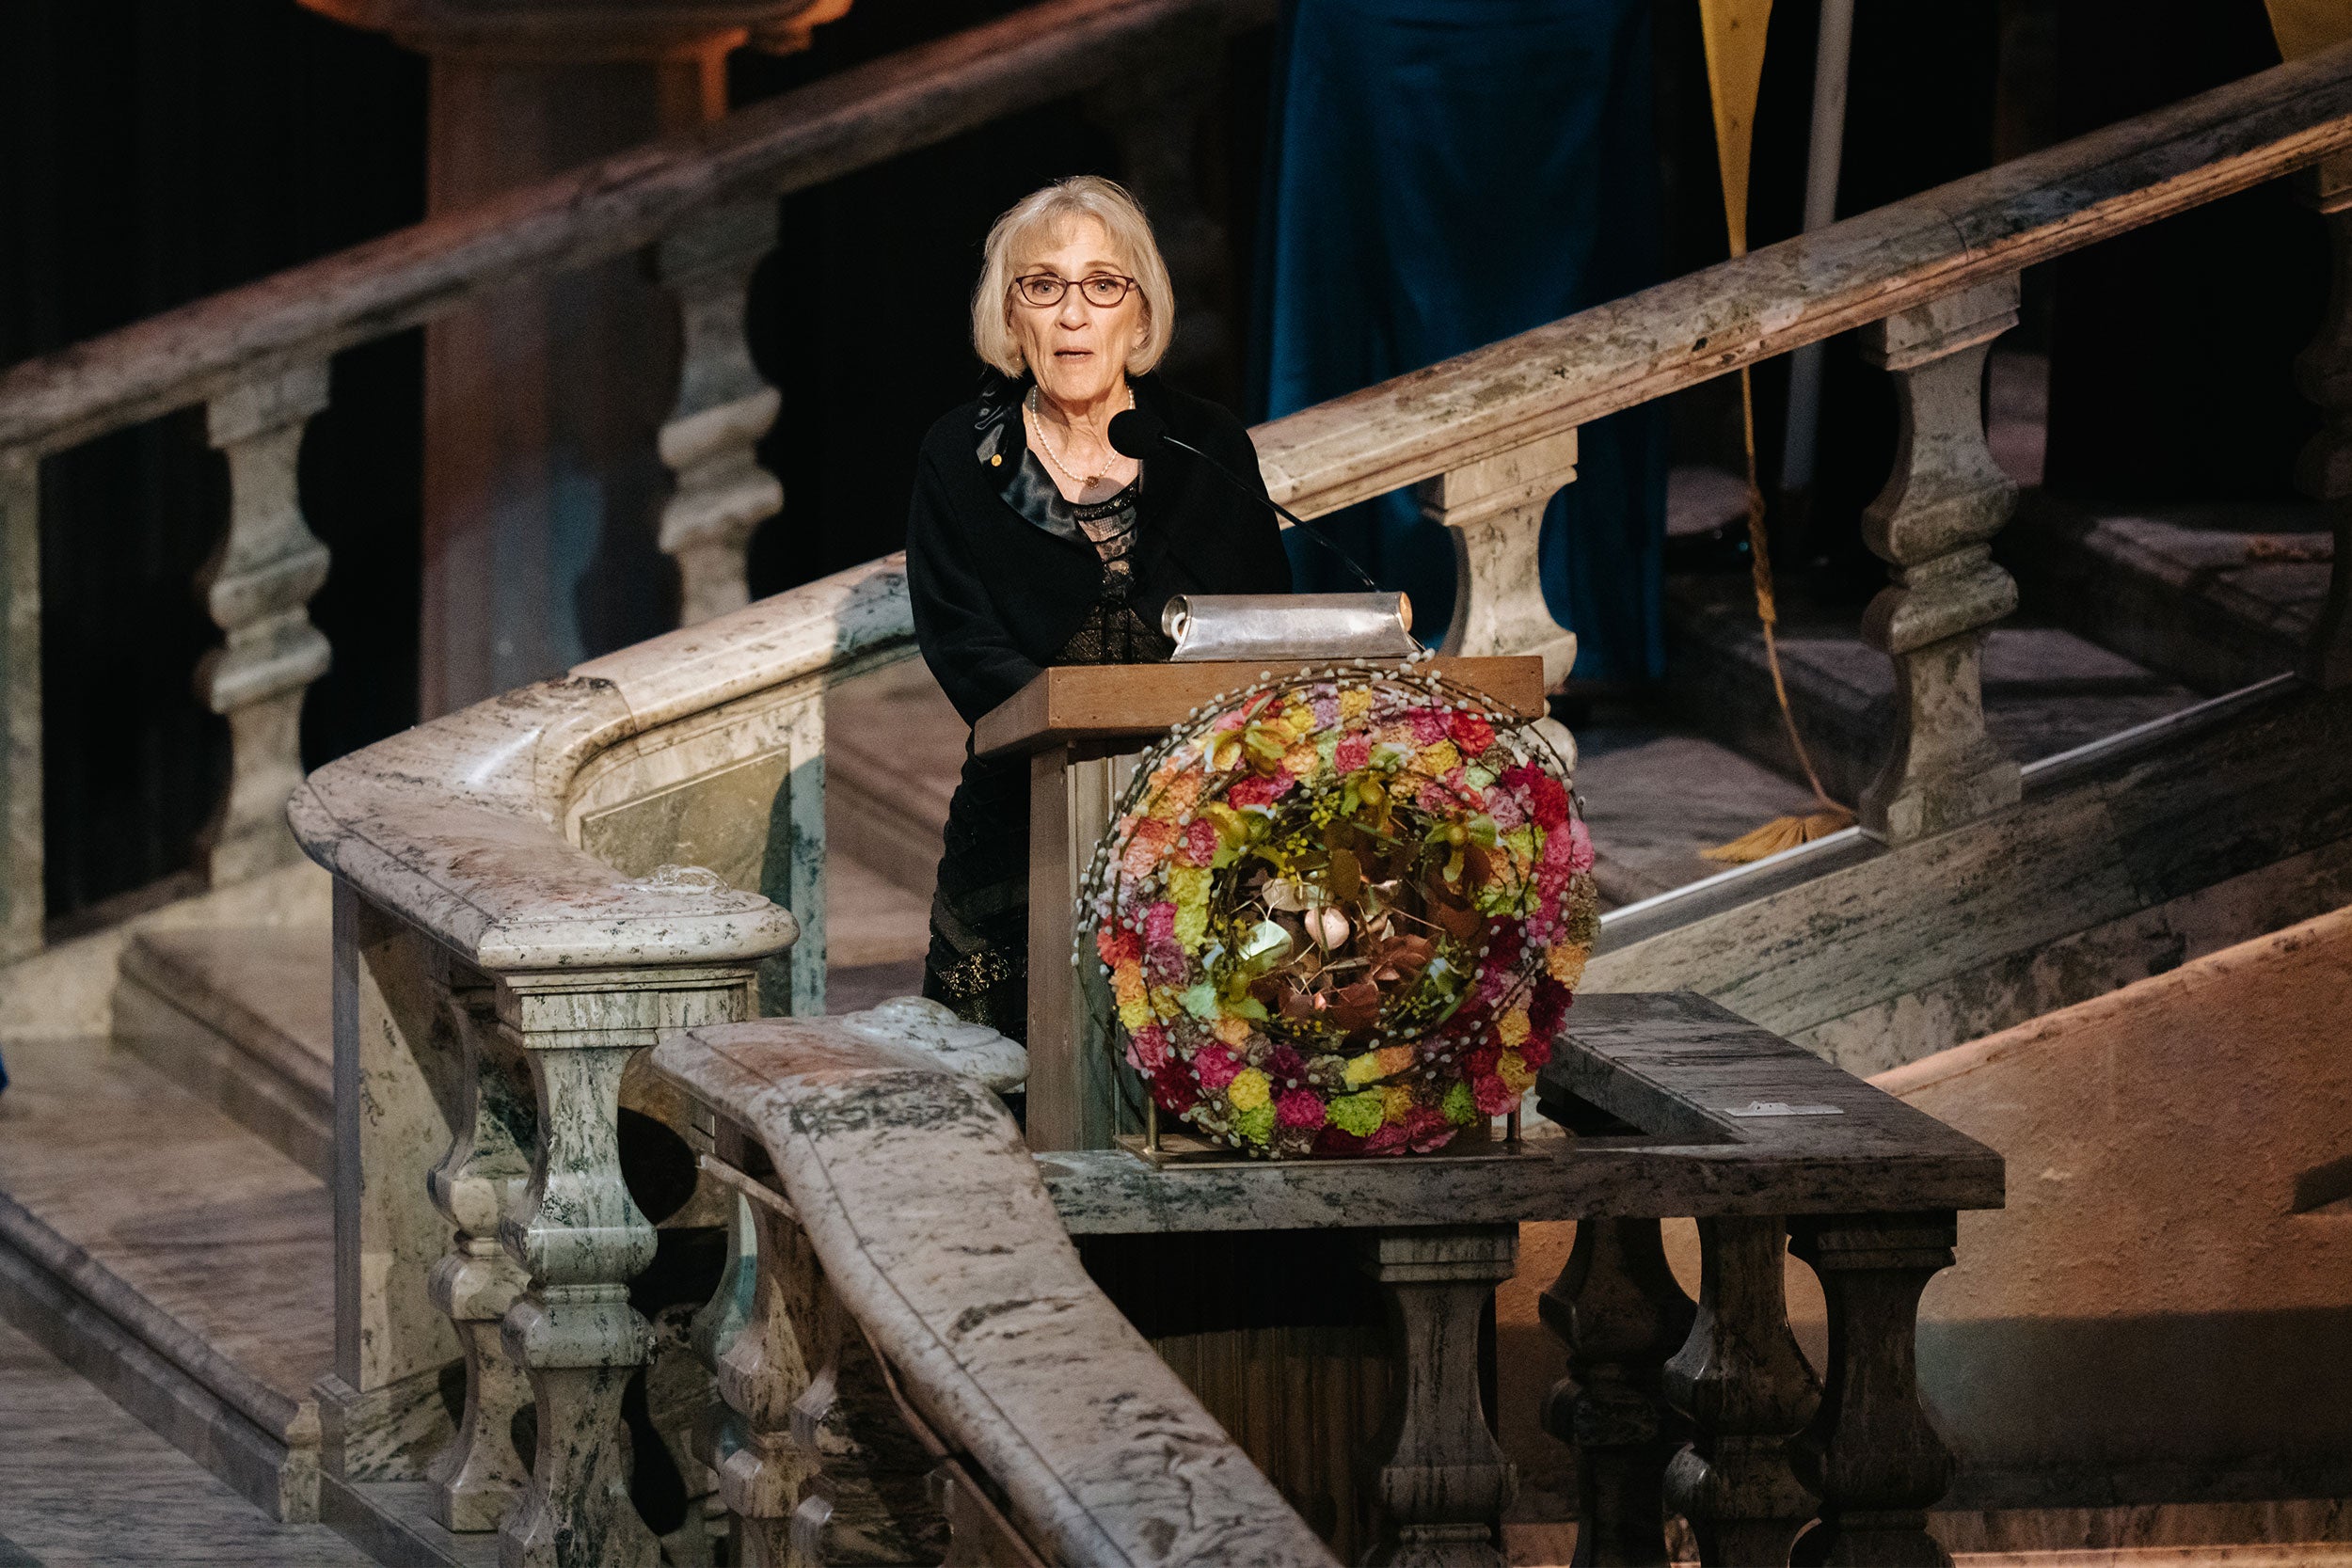 Claudia Goldin delivering her speech at the Nobel ceremony in Stockholm.